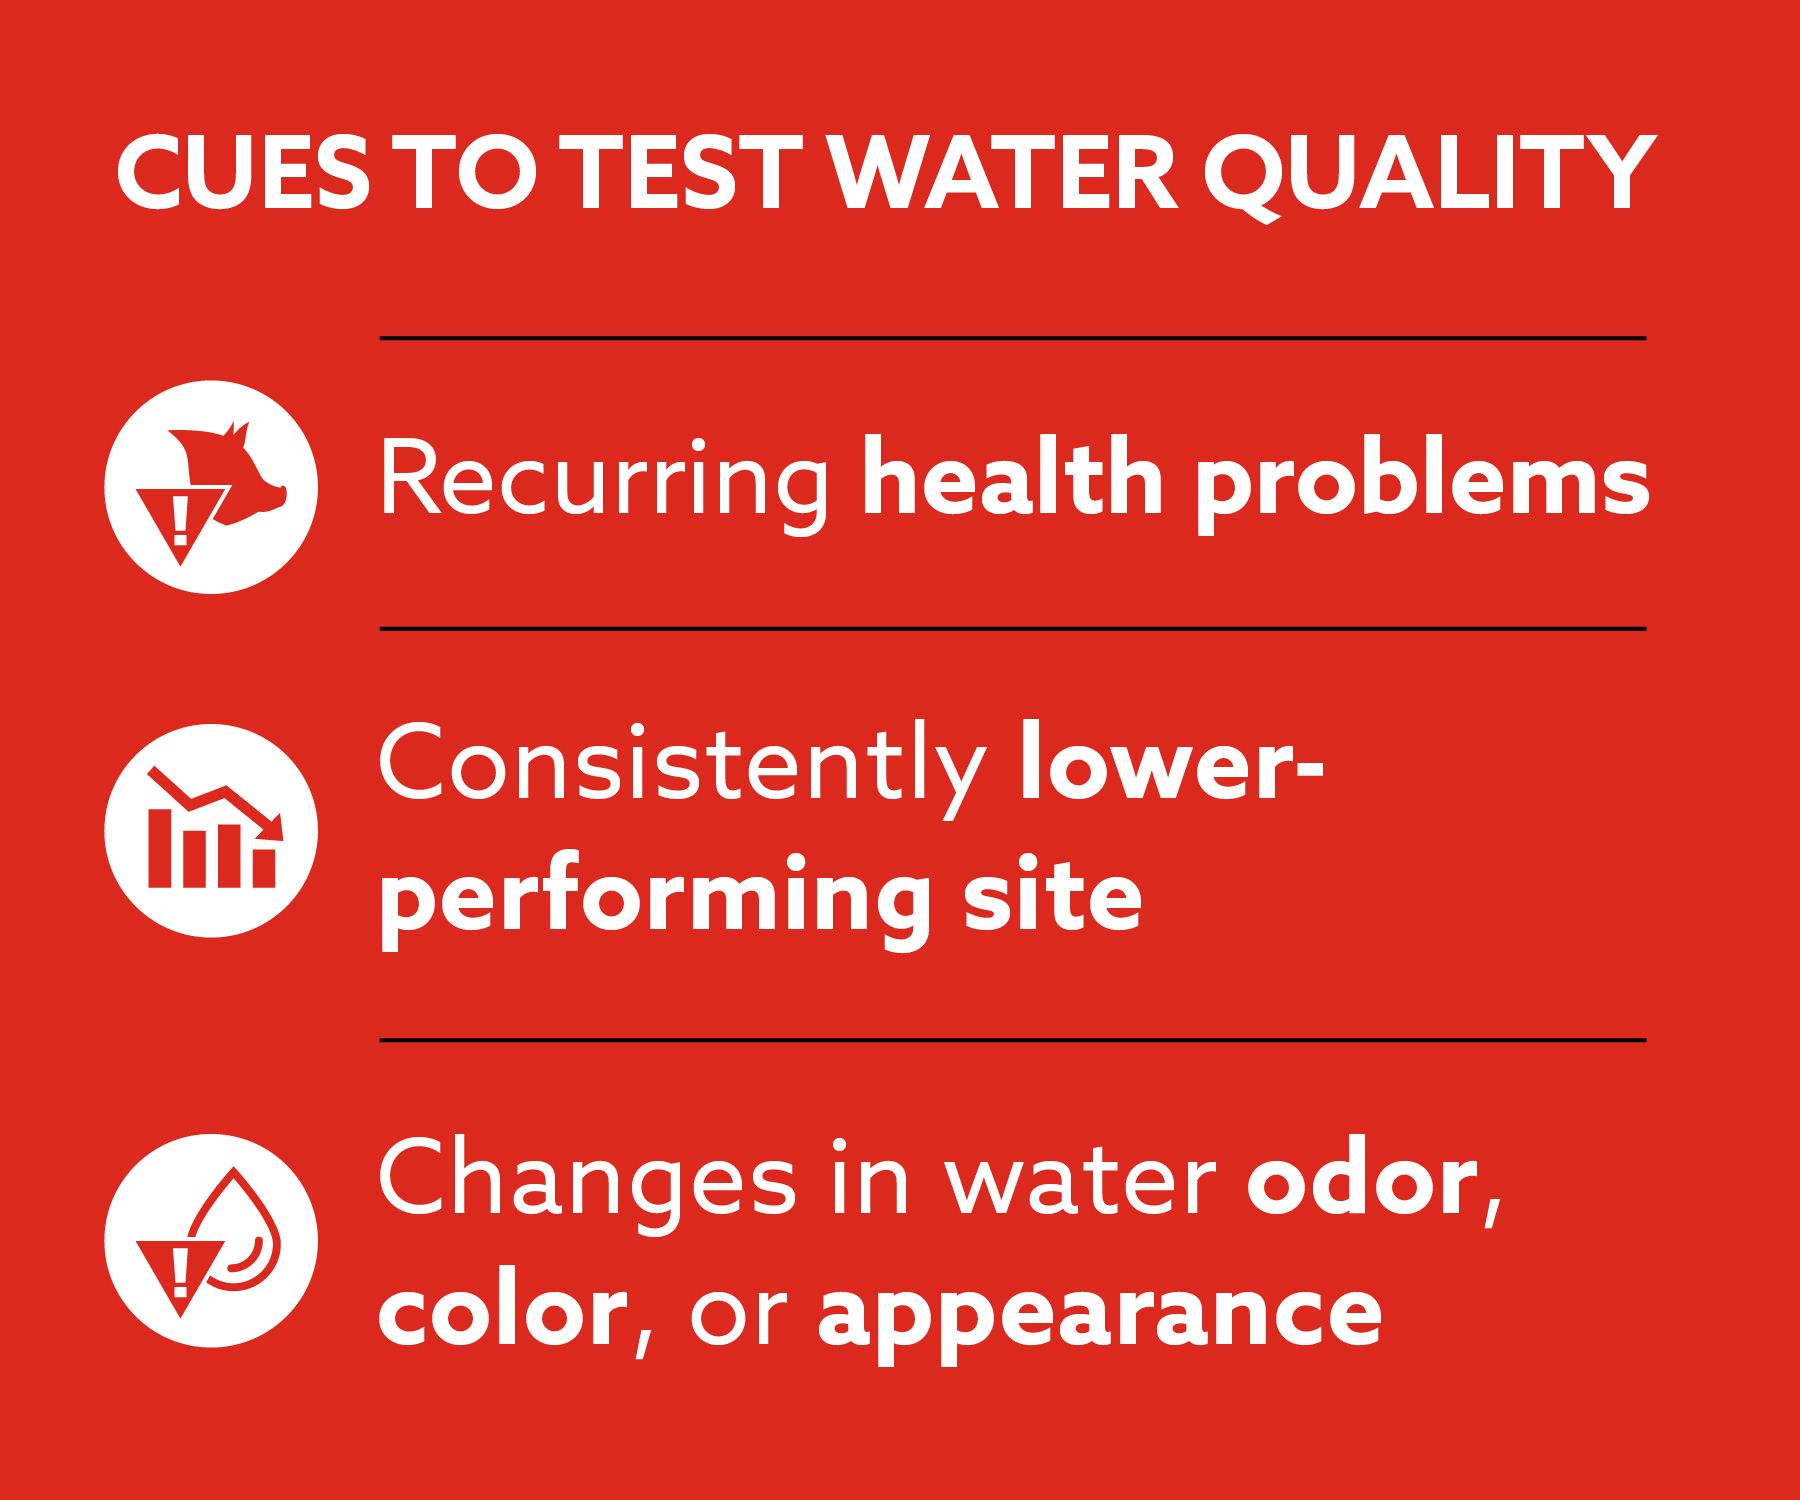 Cues to Test Water